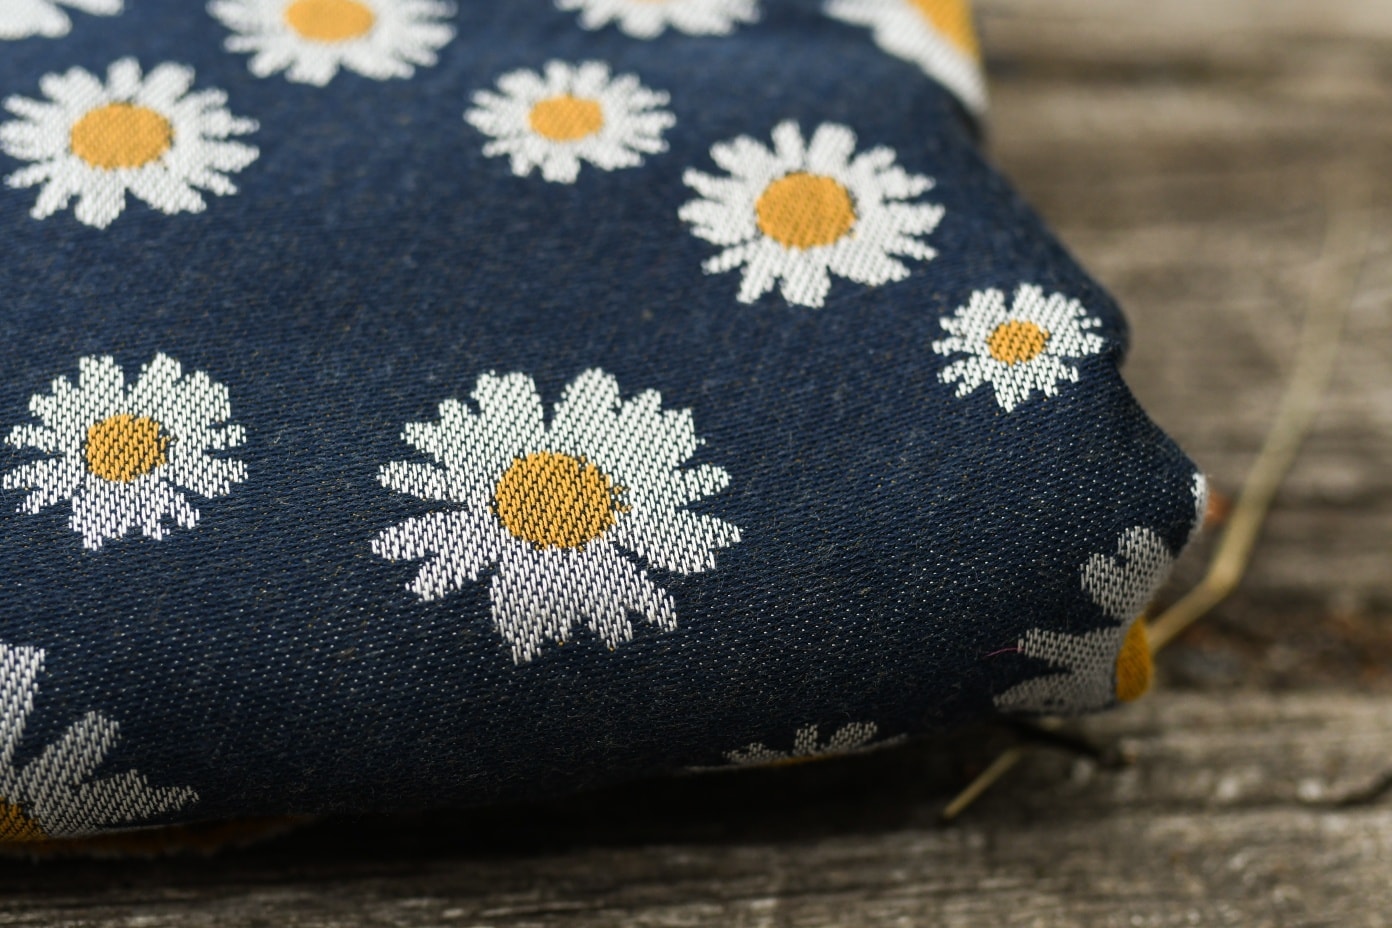 Woven Bliss Daisies Rustic  (бамбук) Image